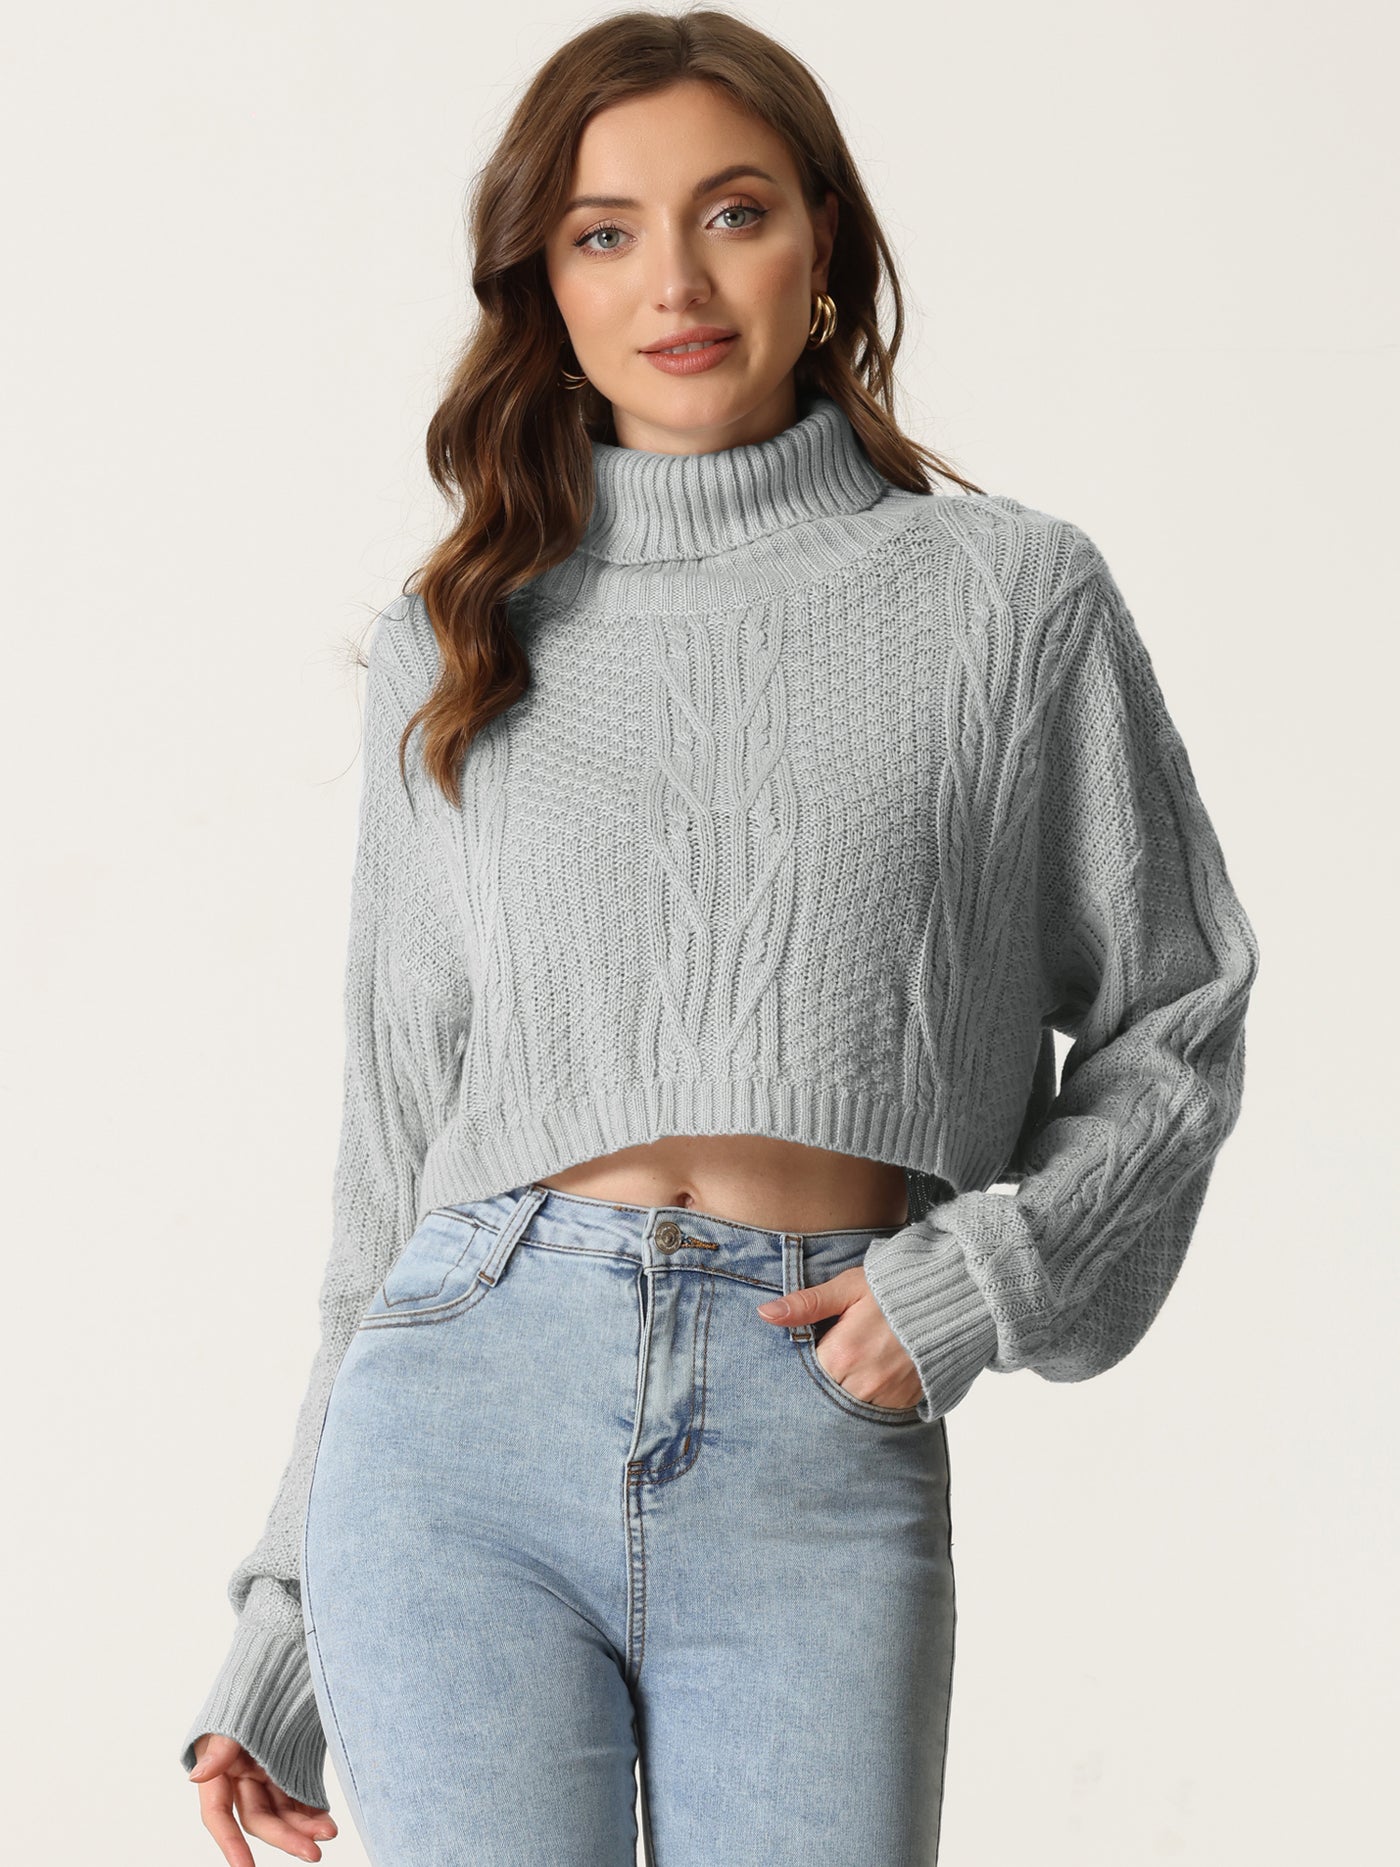 Allegra K Turtle Neck Long Sleeve Knitted Pullover Sweater Cropped Tops